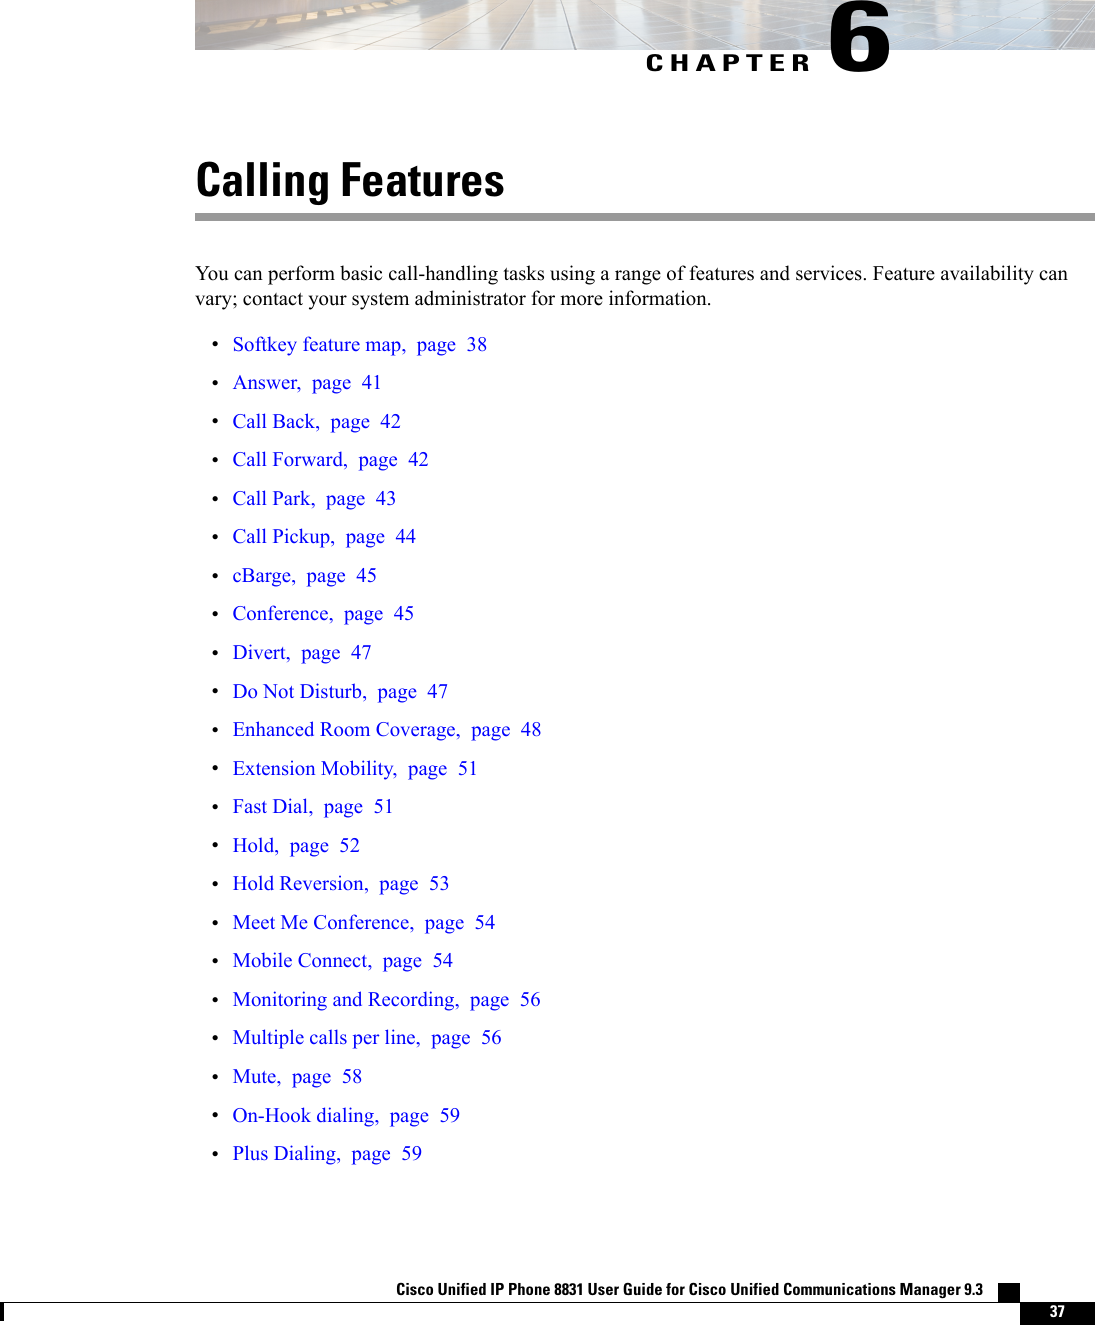 CHAPTER 6Calling FeaturesYou can perform basic call-handling tasks using a range of features and services. Feature availability canvary; contact your system administrator for more information.•Softkey feature map, page 38•Answer, page 41•Call Back, page 42•Call Forward, page 42•Call Park, page 43•Call Pickup, page 44•cBarge, page 45•Conference, page 45•Divert, page 47•Do Not Disturb, page 47•Enhanced Room Coverage, page 48•Extension Mobility, page 51•Fast Dial, page 51•Hold, page 52•Hold Reversion, page 53•Meet Me Conference, page 54•Mobile Connect, page 54•Monitoring and Recording, page 56•Multiple calls per line, page 56•Mute, page 58•On-Hook dialing, page 59•Plus Dialing, page 59Cisco Unified IP Phone 8831 User Guide for Cisco Unified Communications Manager 9.3    37